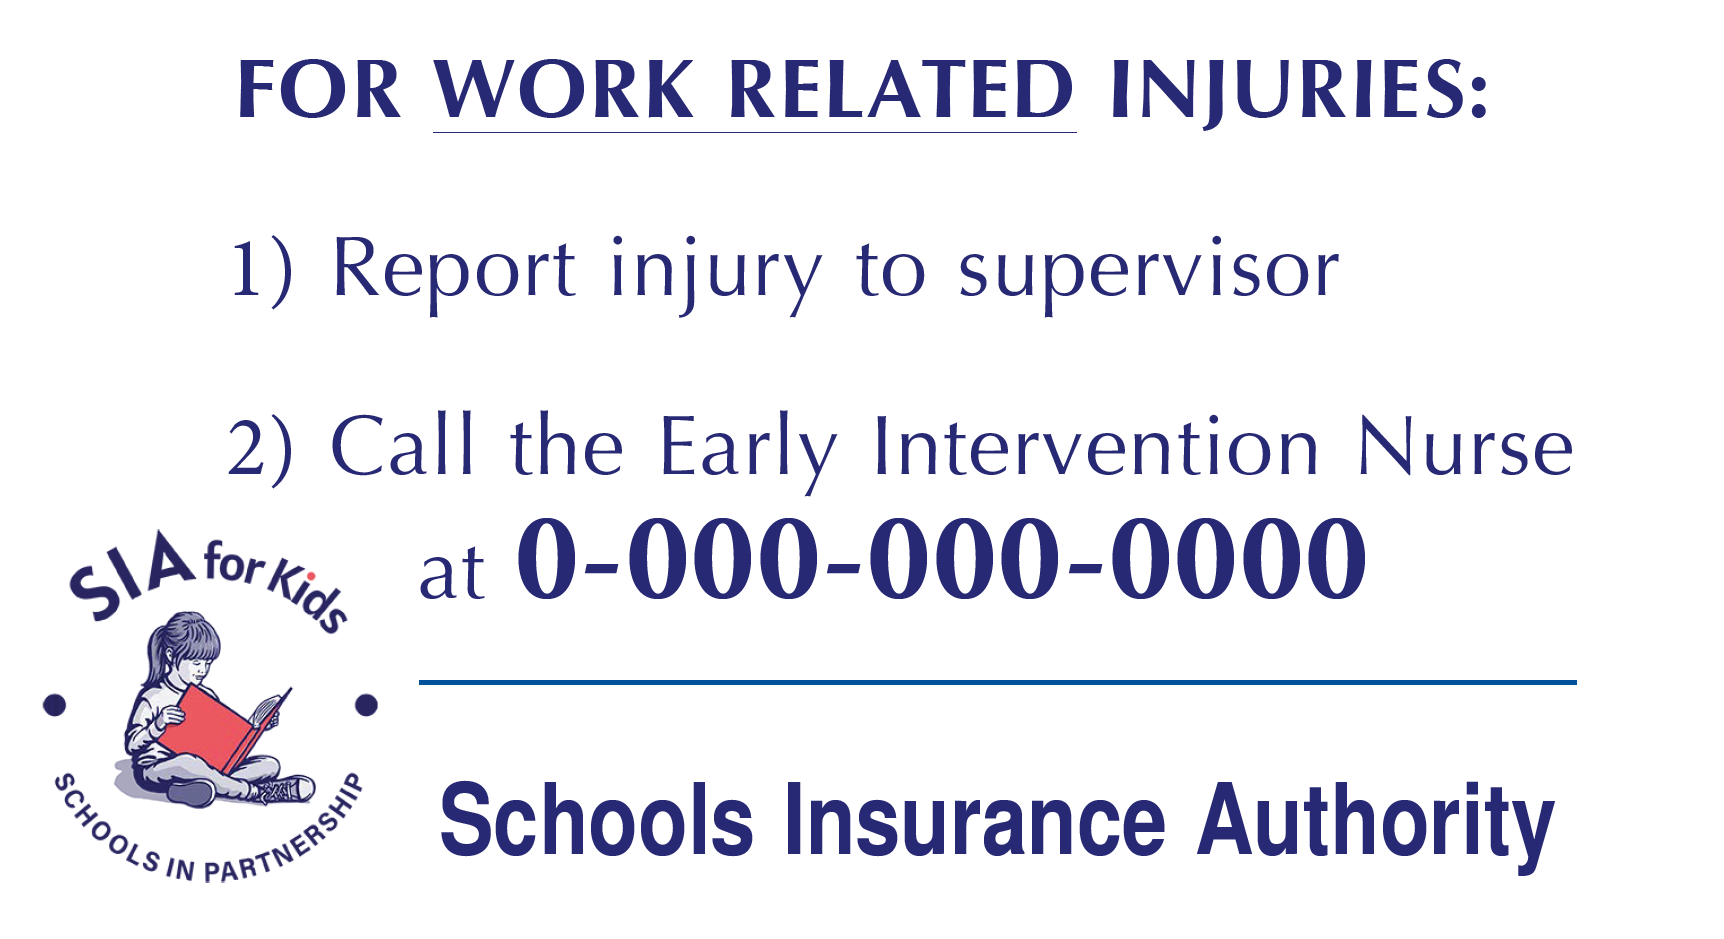 FOR WORK RELATED INJURIES: 1) Report injury to supervisor 2)Call the Early Intervention Nurse at 1-877-742-3467